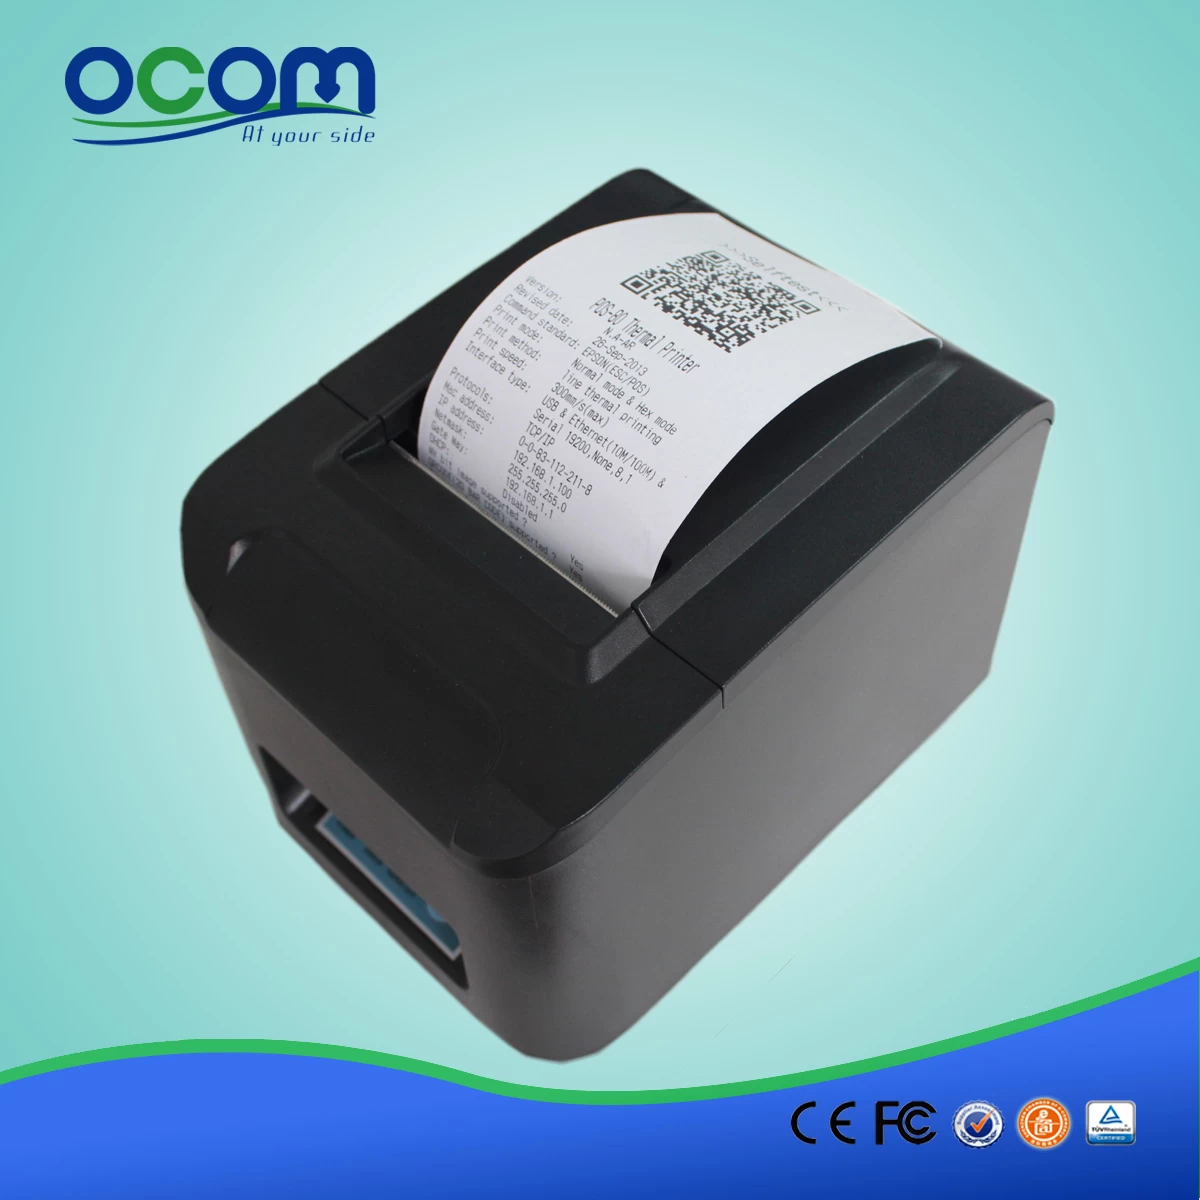 80mm Thermal Printer with High Performance